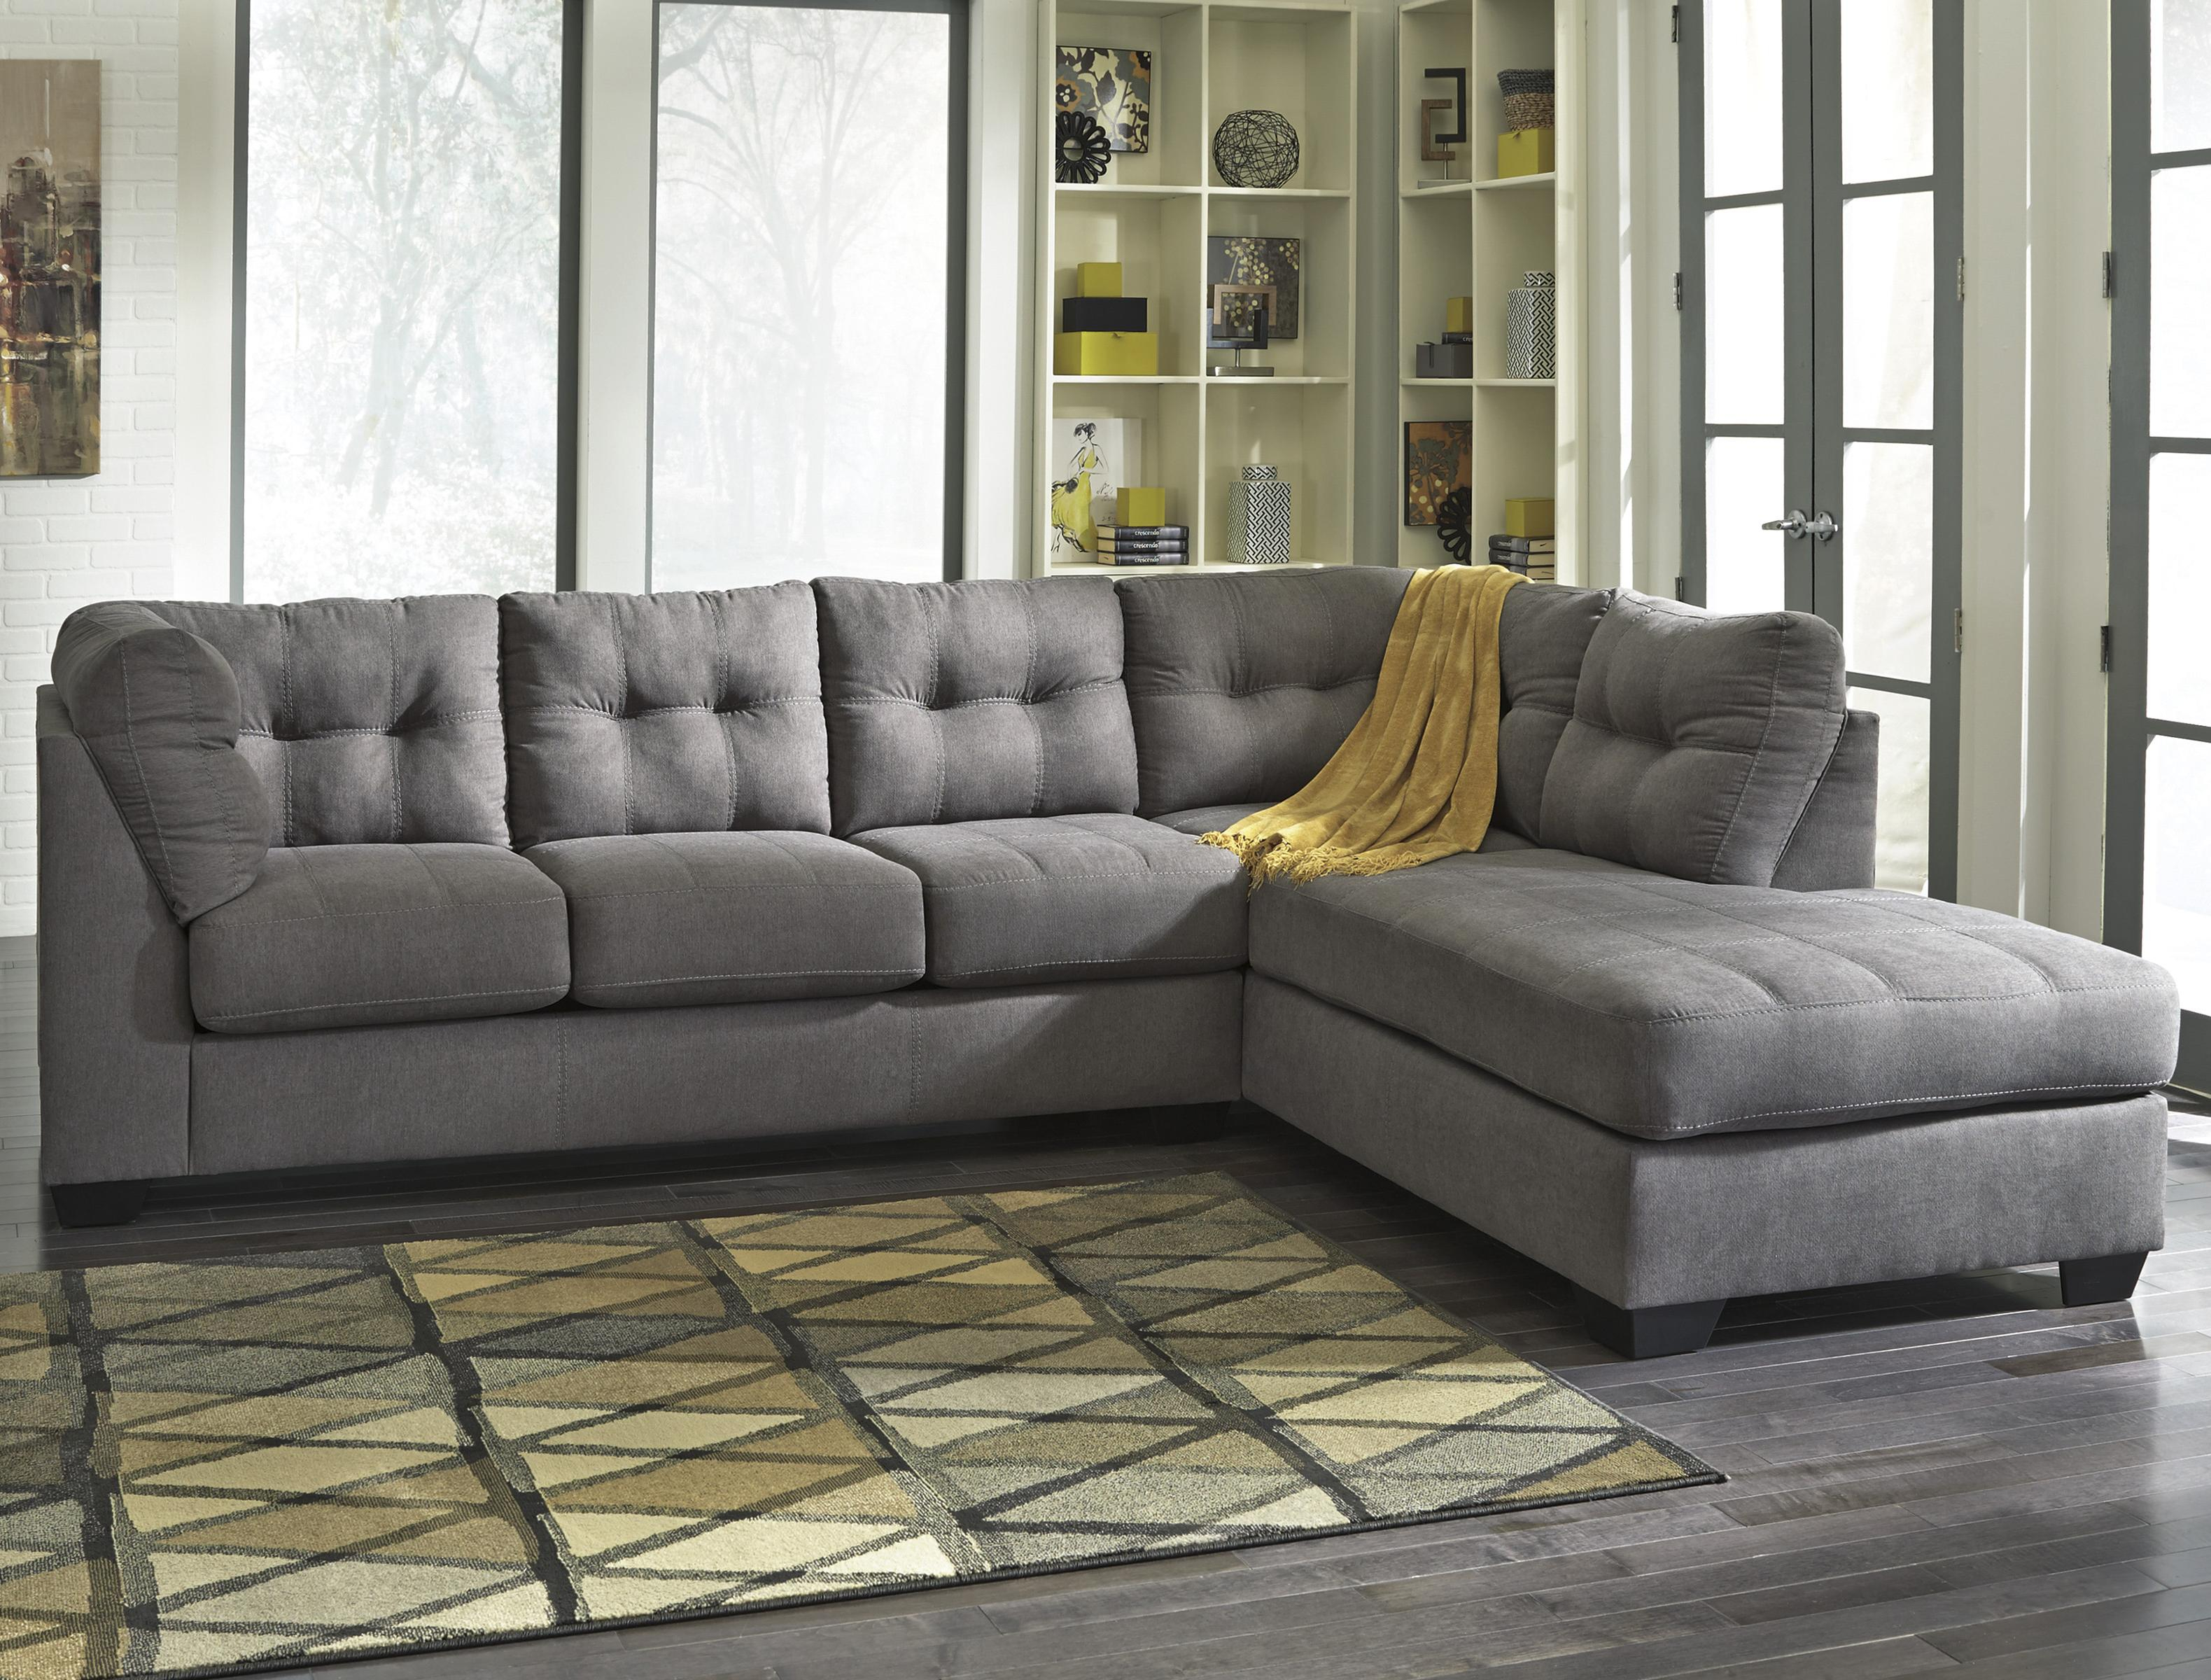 Maier - Charcoal 2-Piece Sectional W/ Sleeper Sofa &amp; Chaise throughout Ashley Furniture 2 Piece Sectional